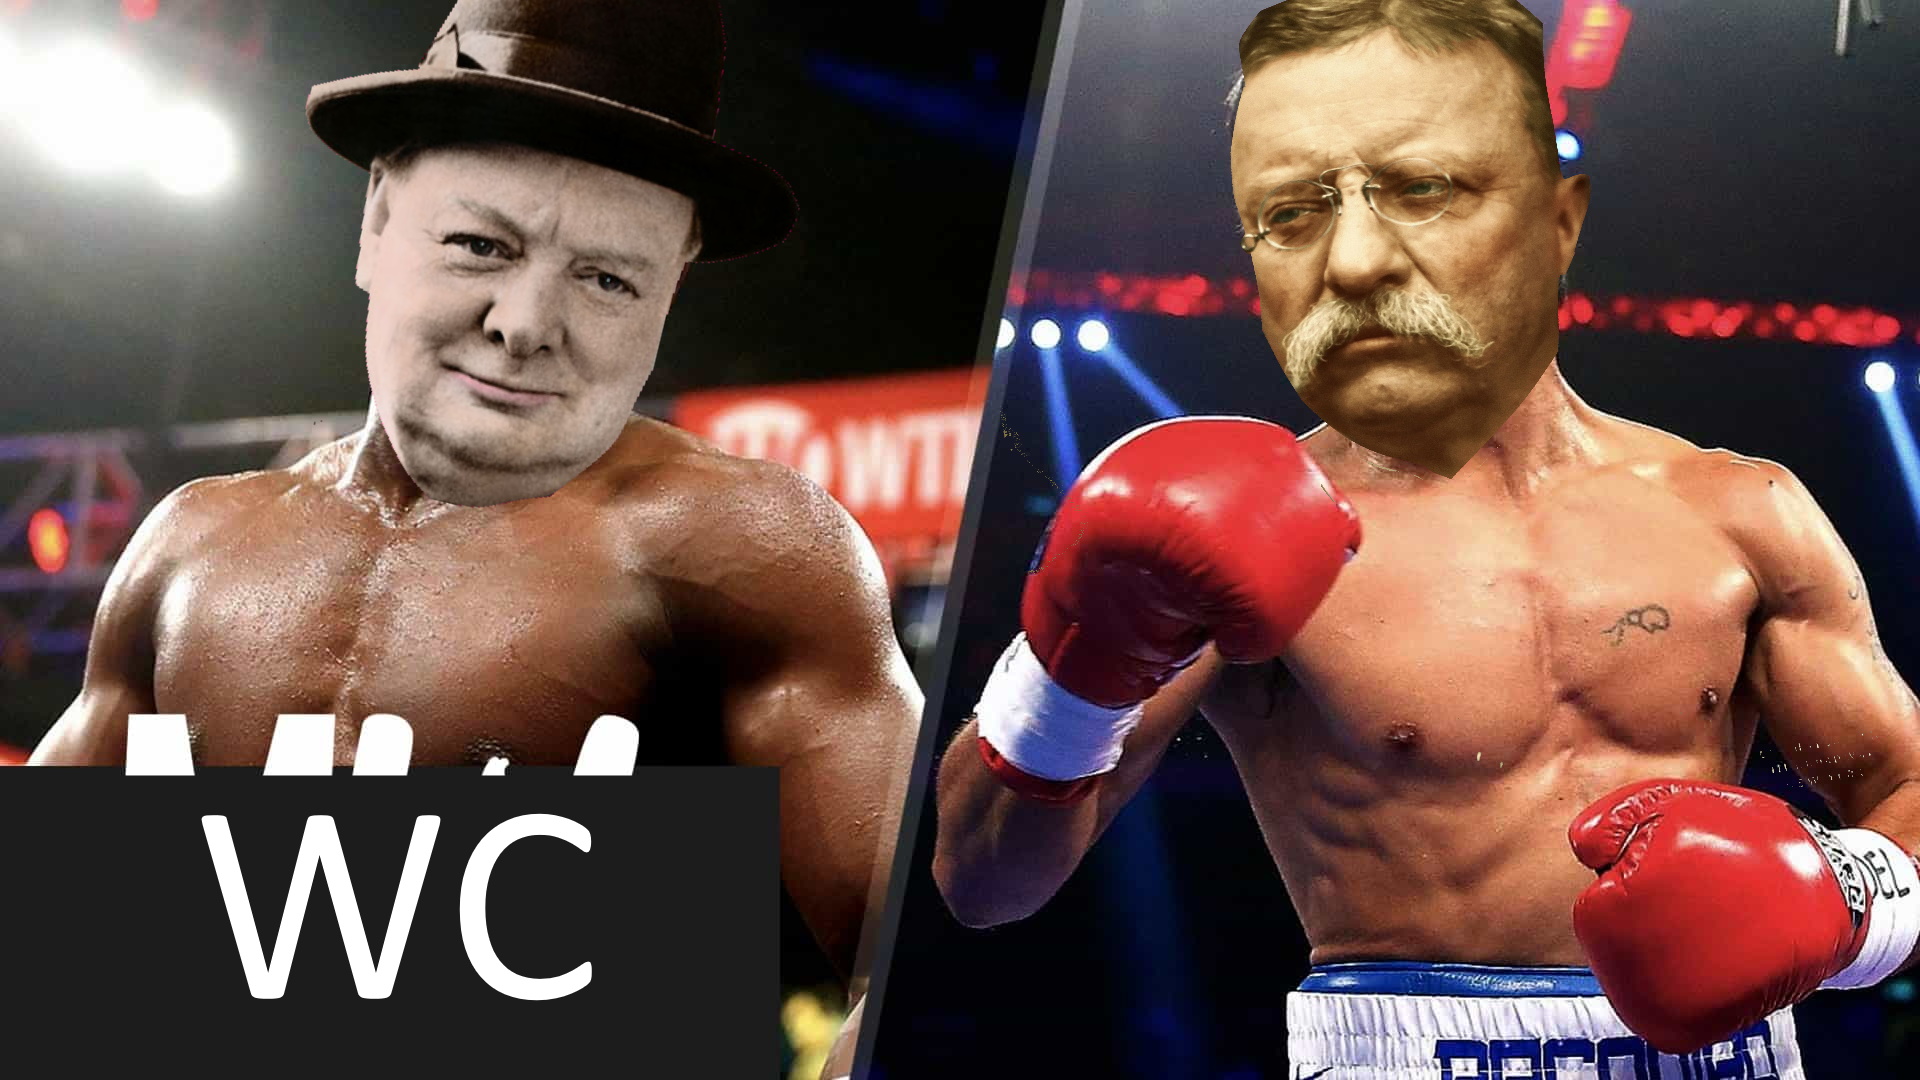 Why Teddy Roosevelt Would Beat Winston Churchill in a fight.